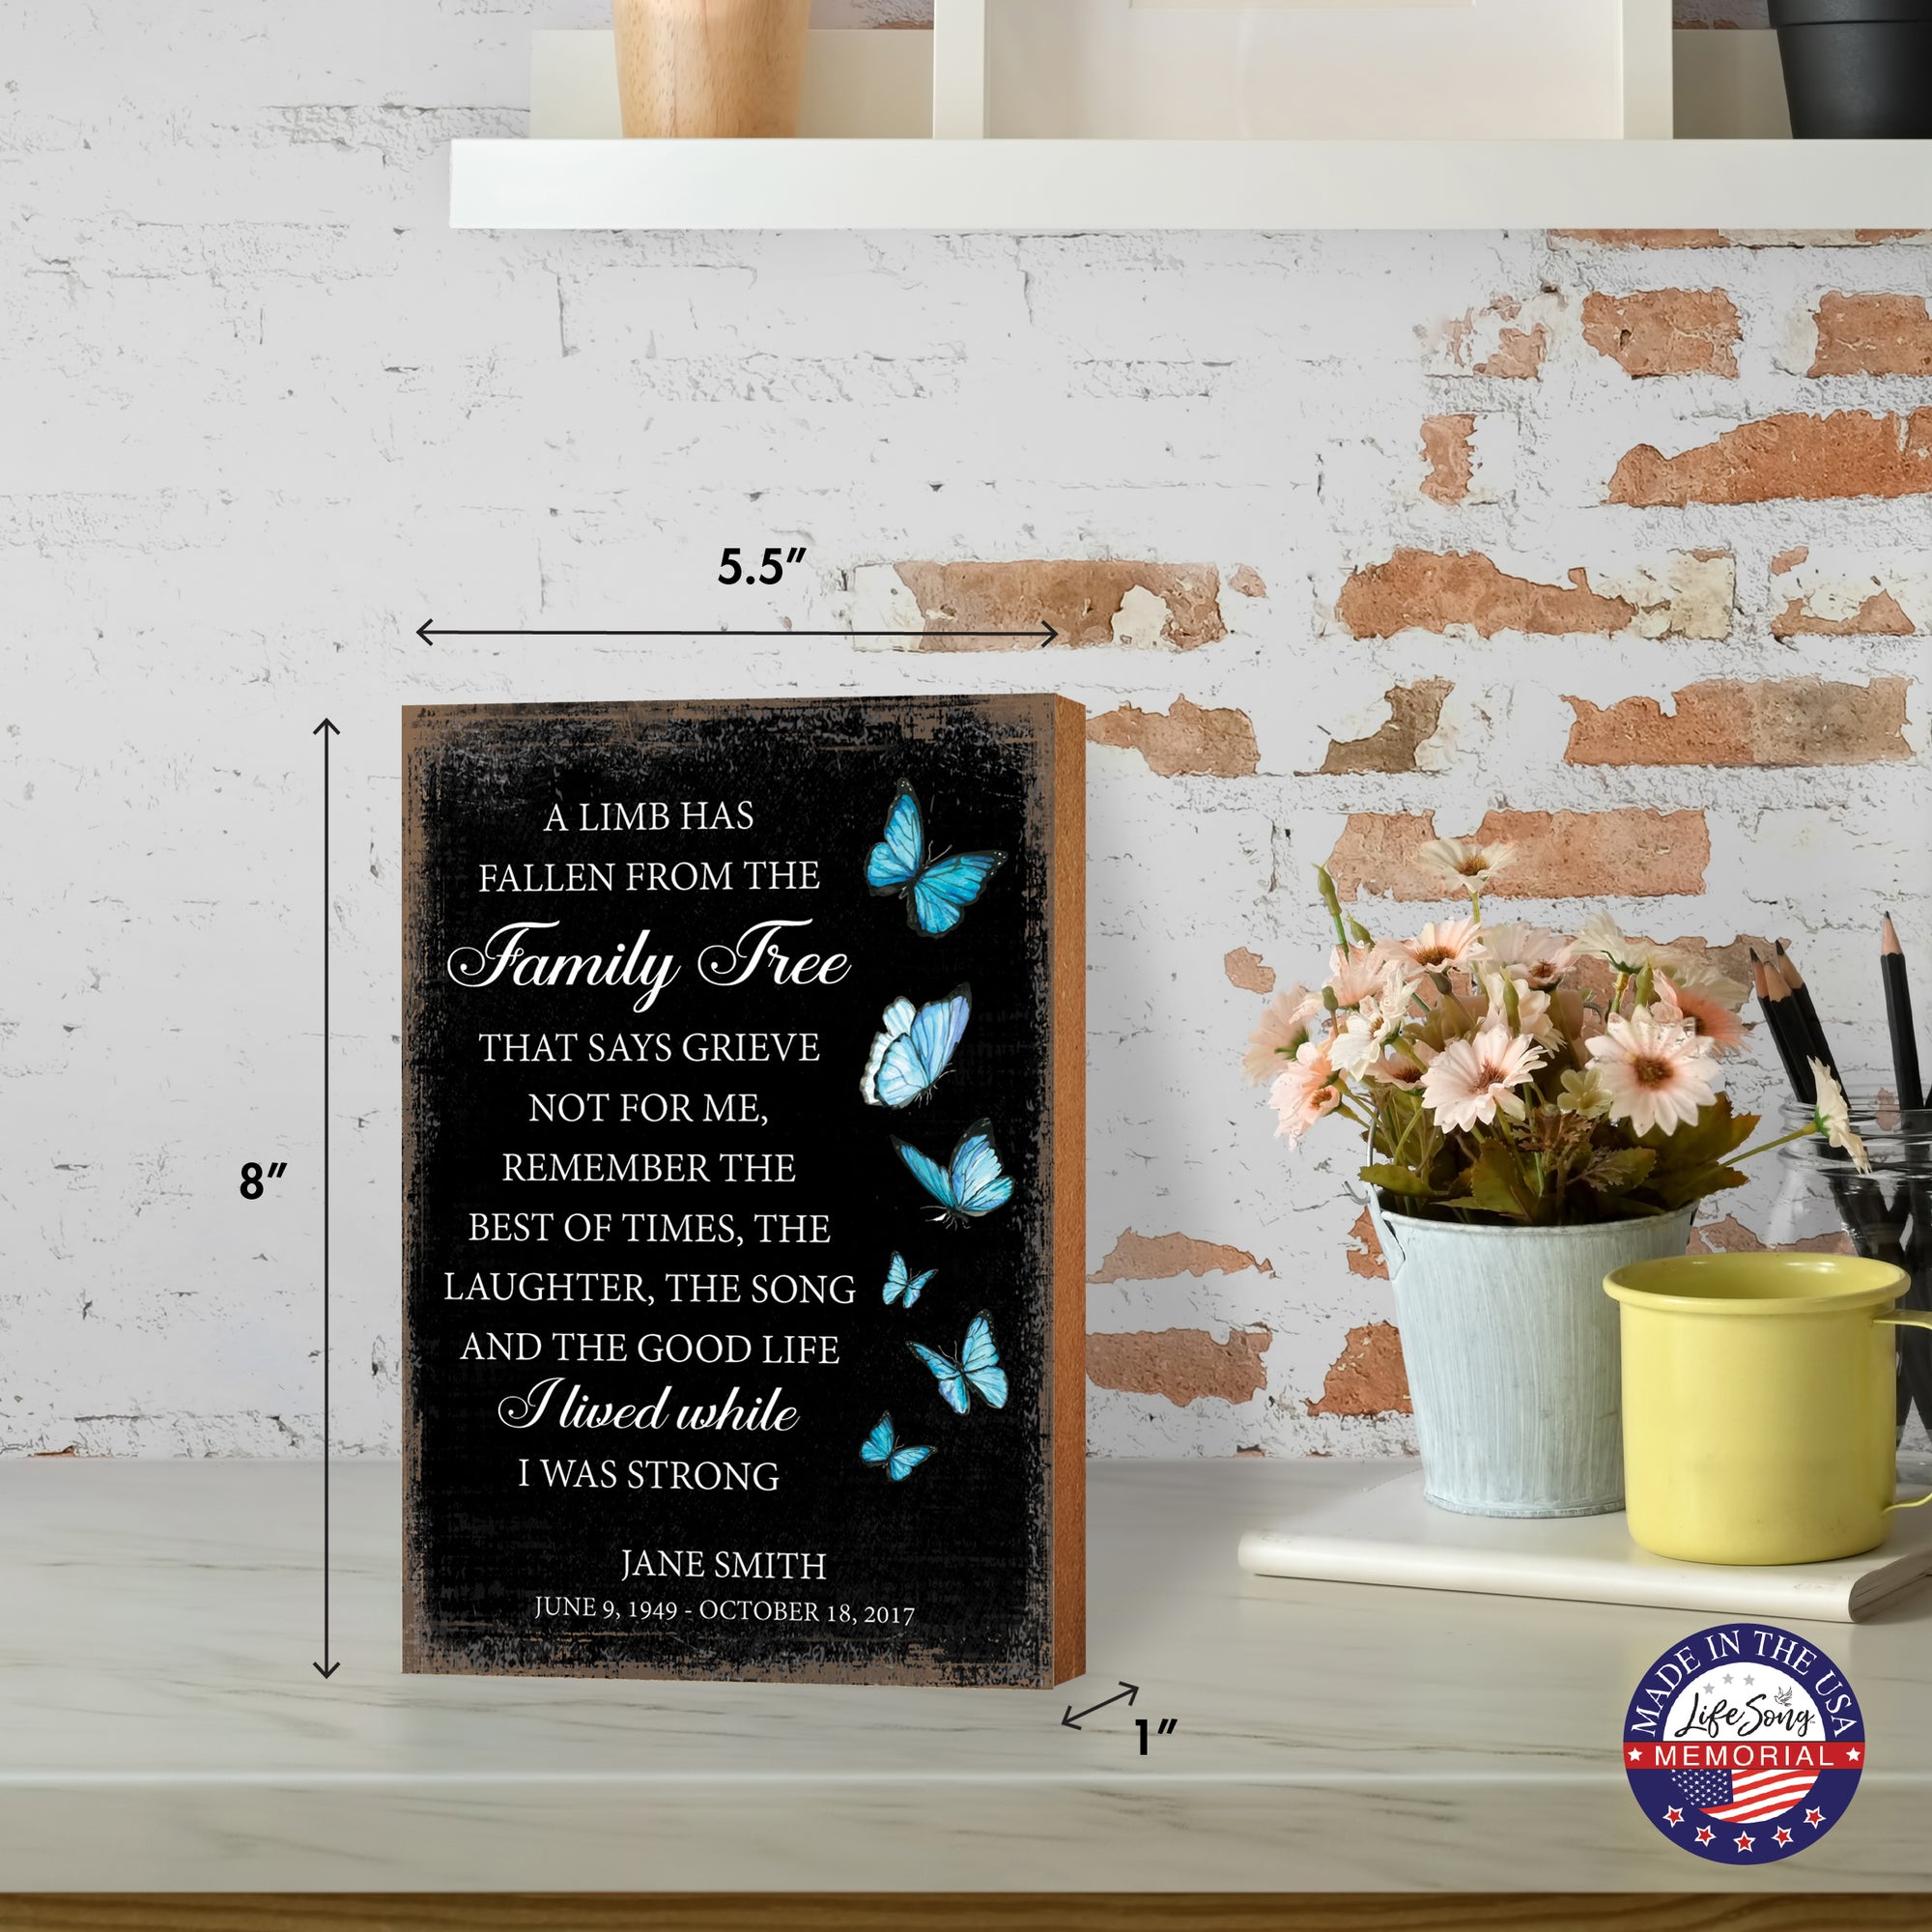 A Limb Has Fallen Vintage-Inspired Wooden Memorial Sign & Shelf Décor For The Loss Of Loved One Sympathy Gift